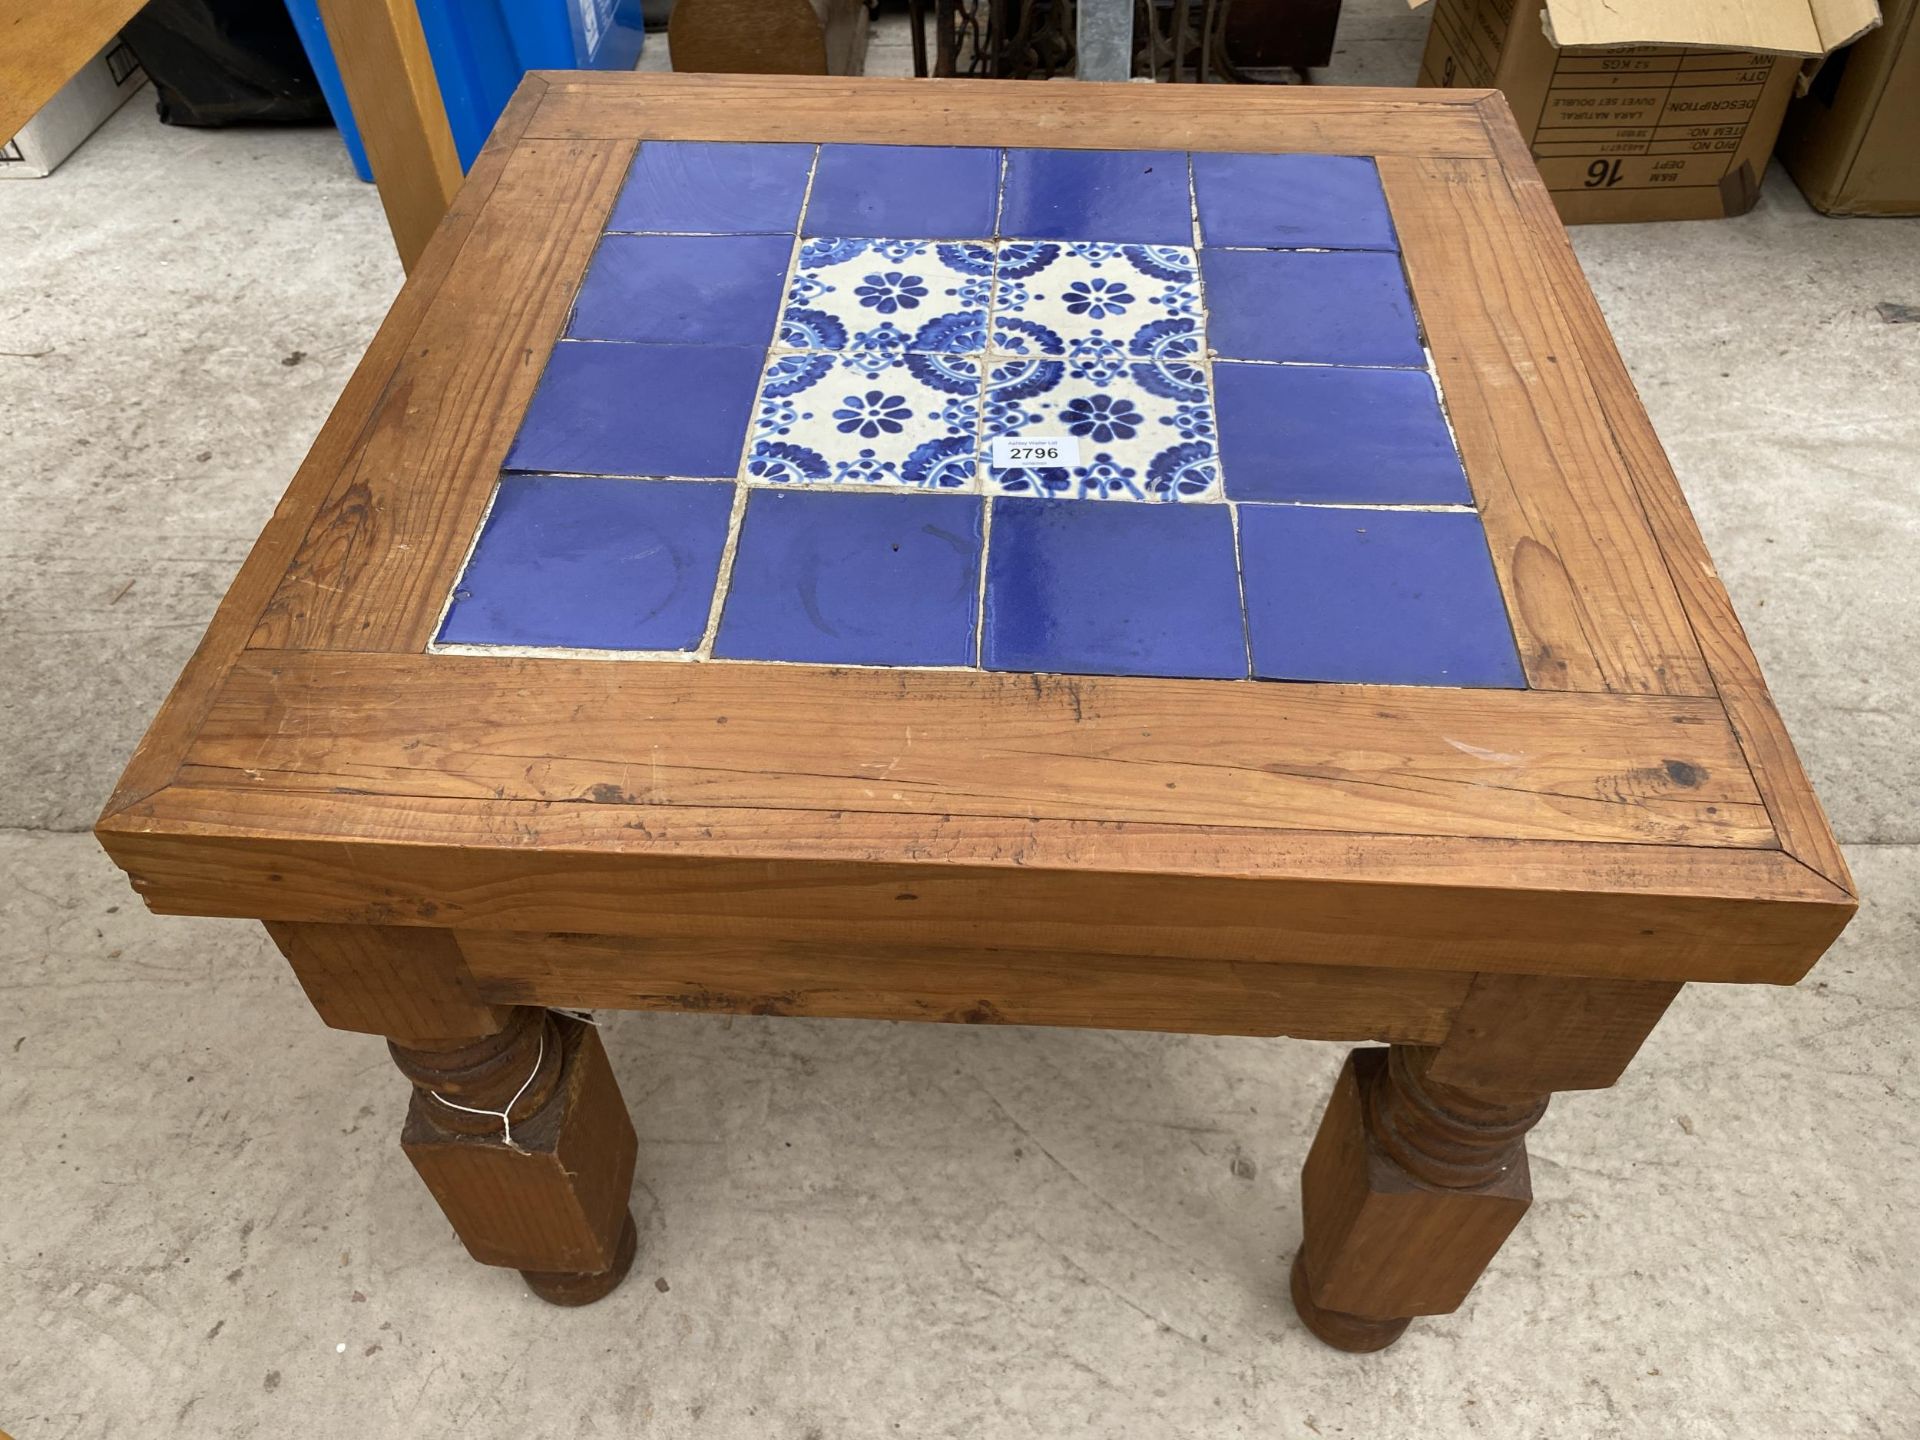 A MODERN PINE LAMP TABLE WITH INSET TILE TOP, 23.5" SQUARE